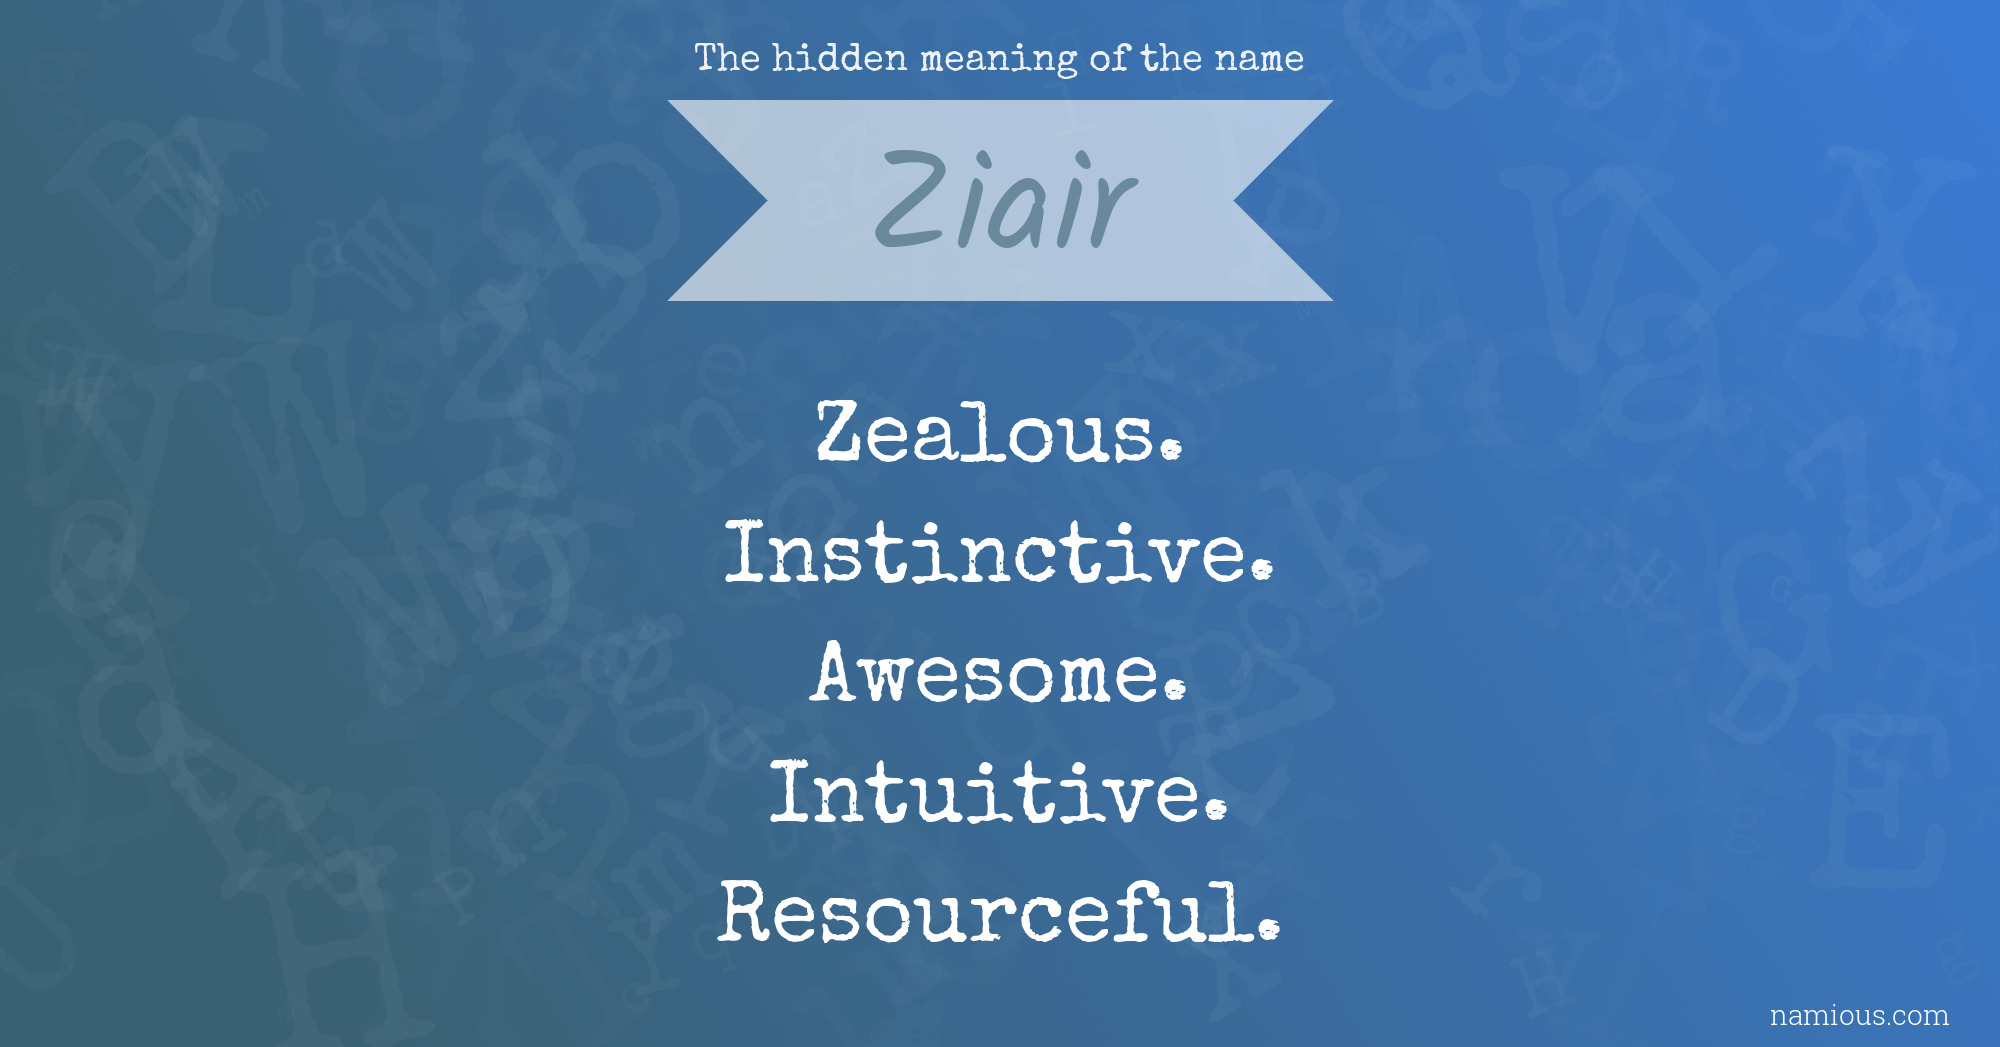 The hidden meaning of the name Ziair